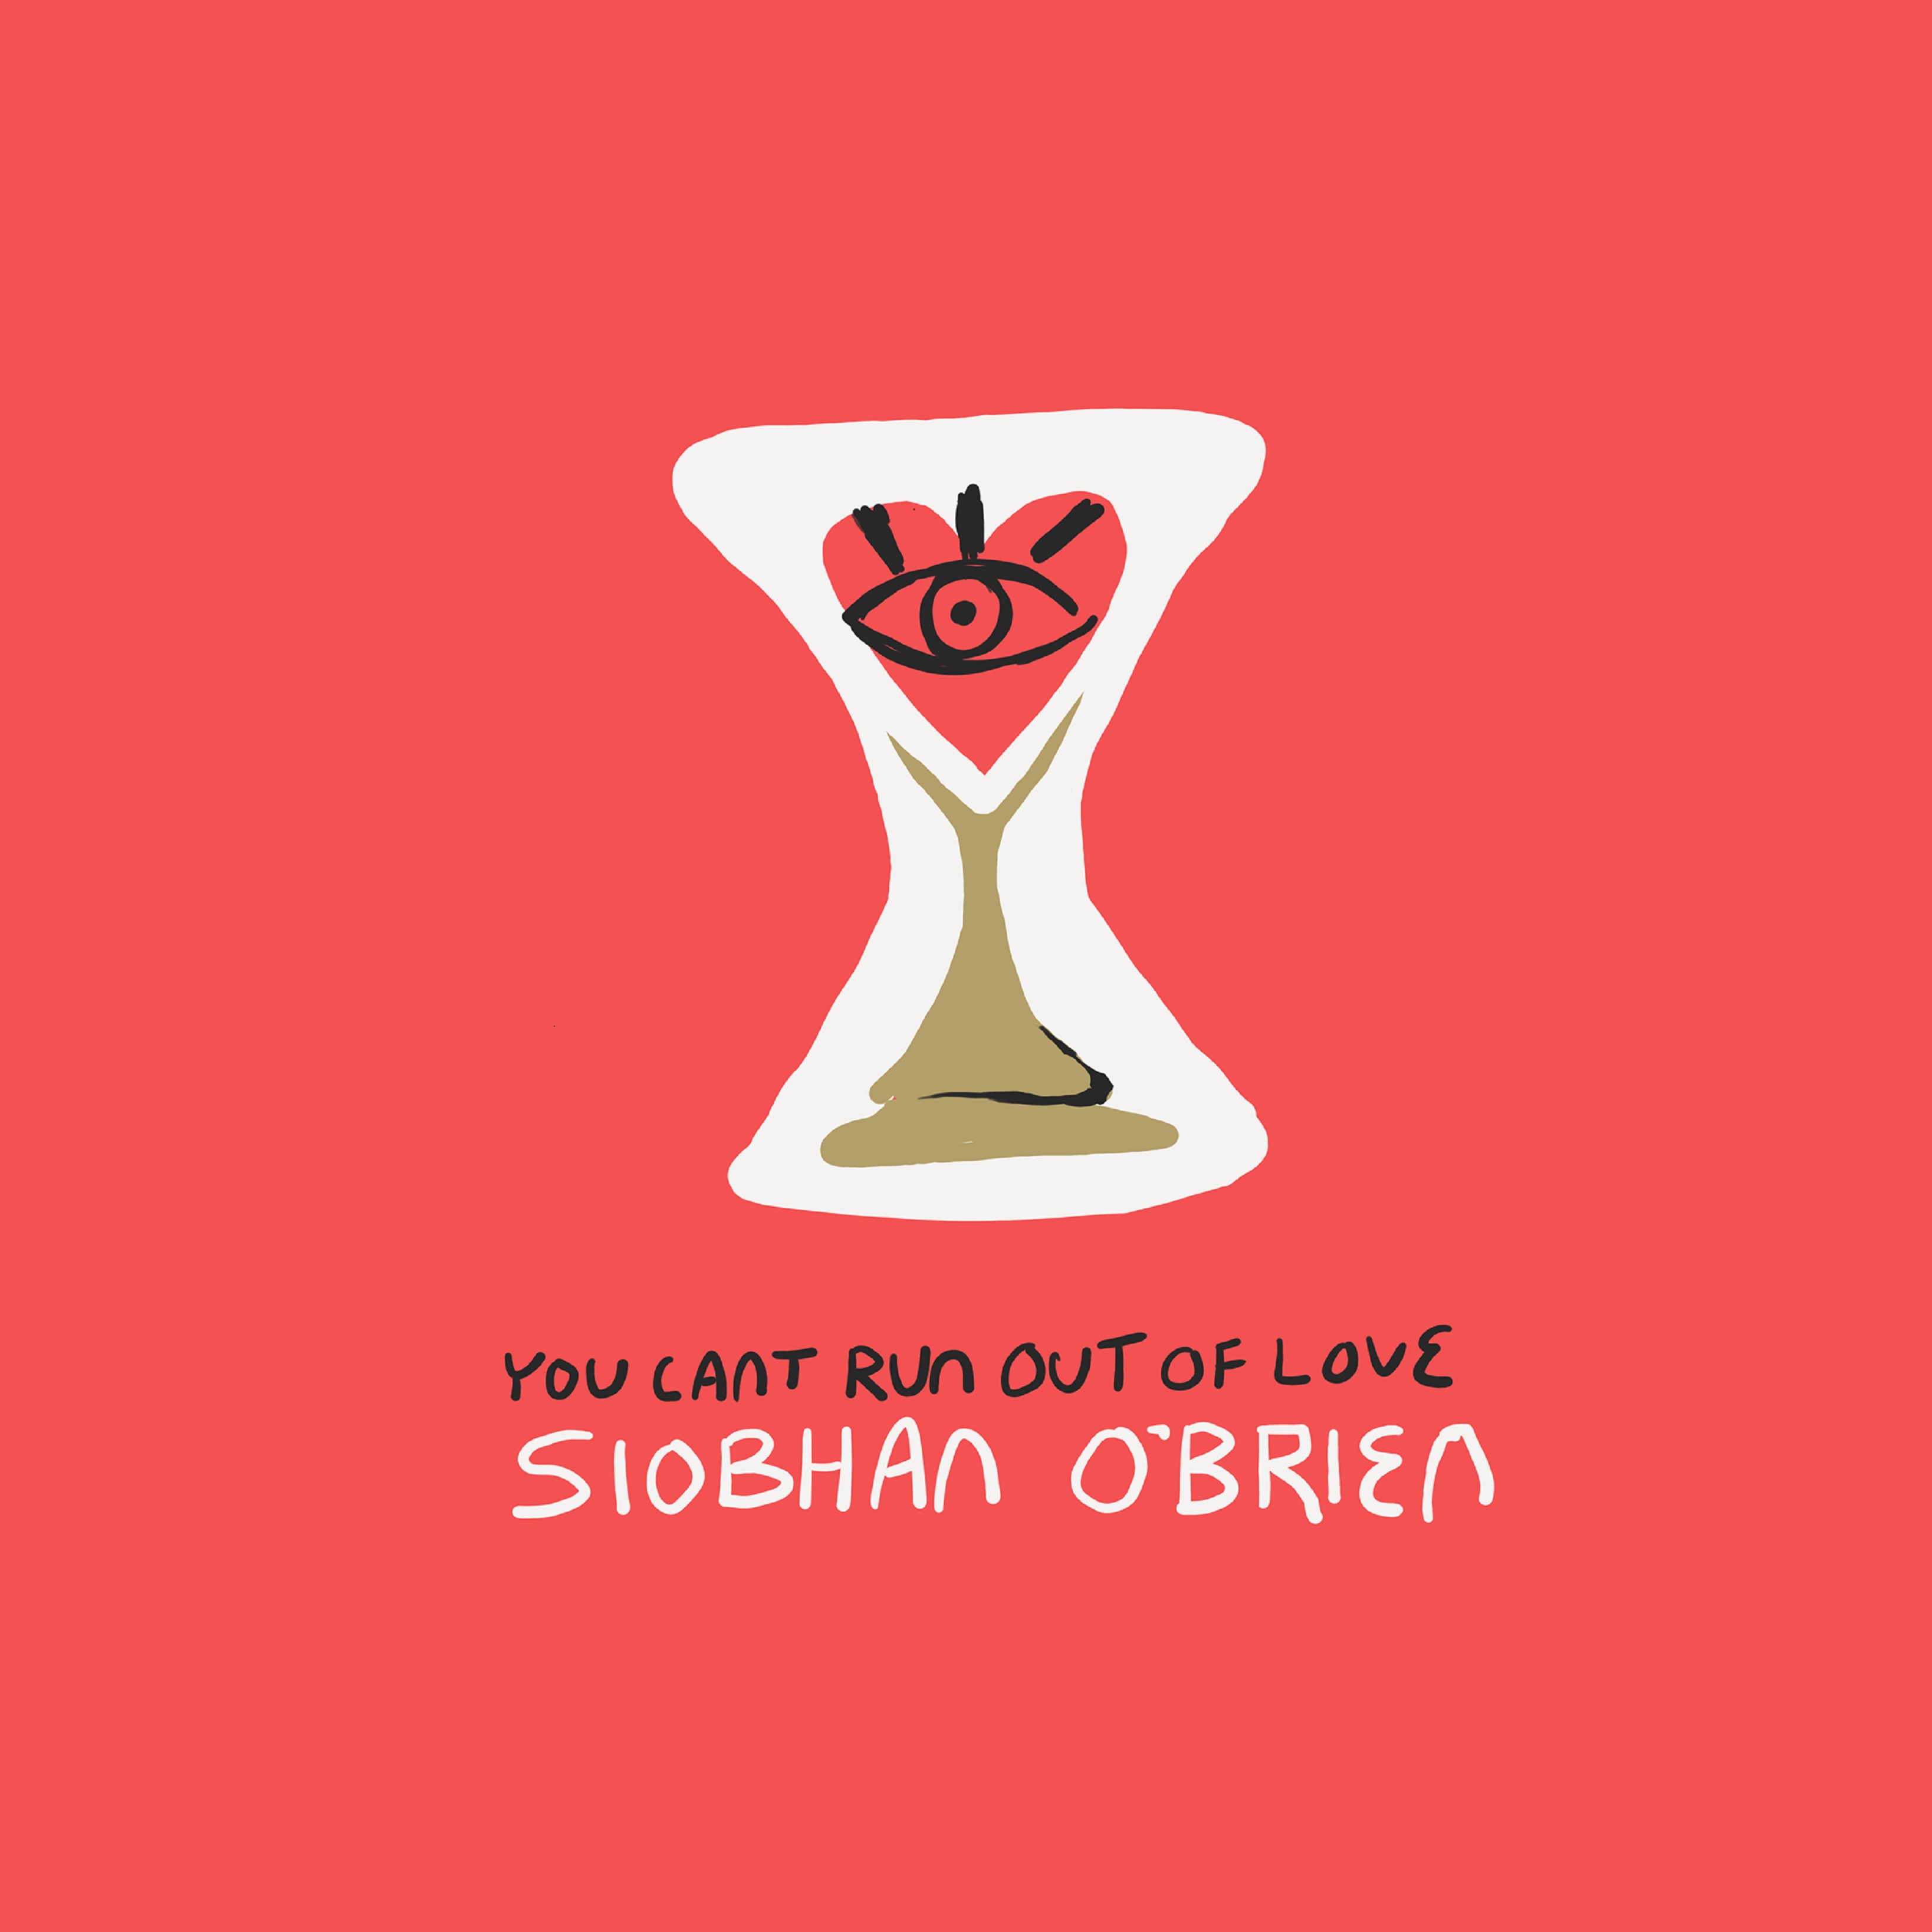 Siobhan O'Brien Releases Her New Album You Can’t Run Out Of Love